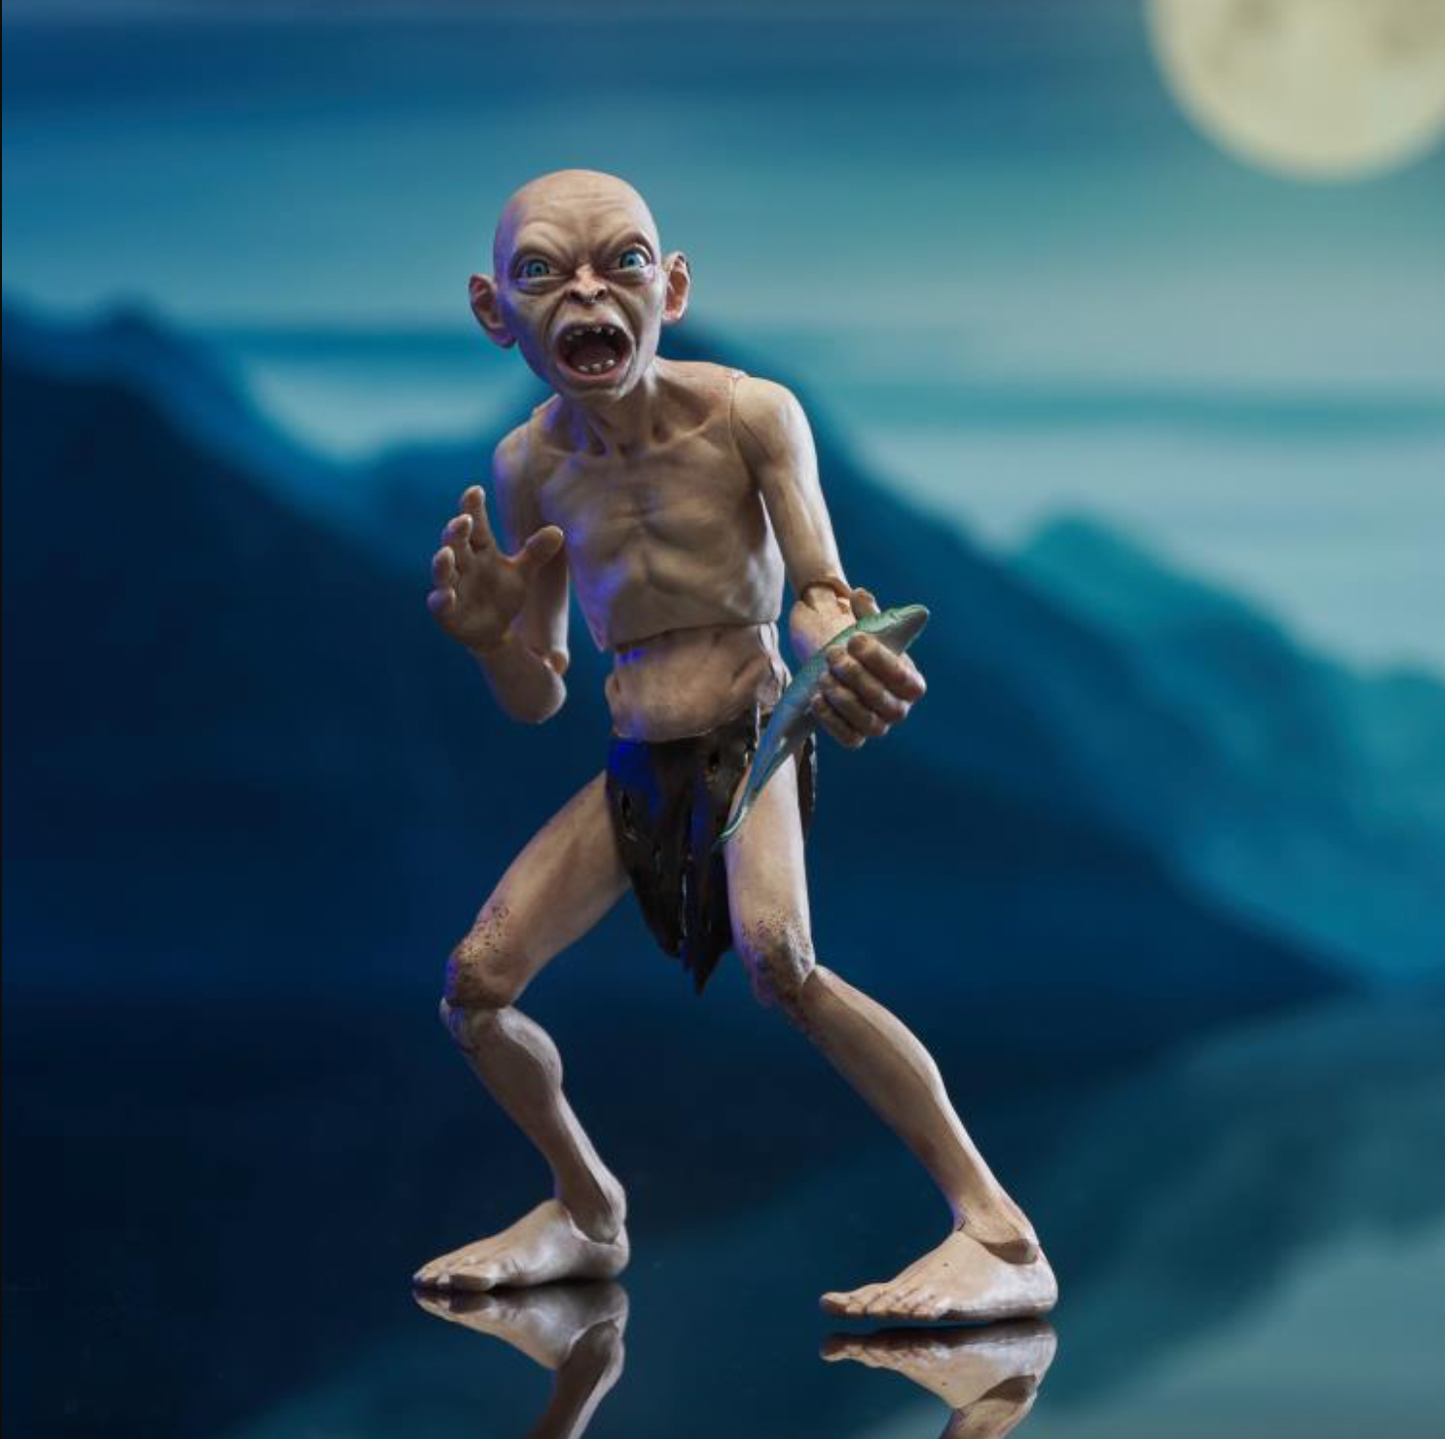 First Look: New Deluxe Lord of the Rings Gollum and Smeagol Action